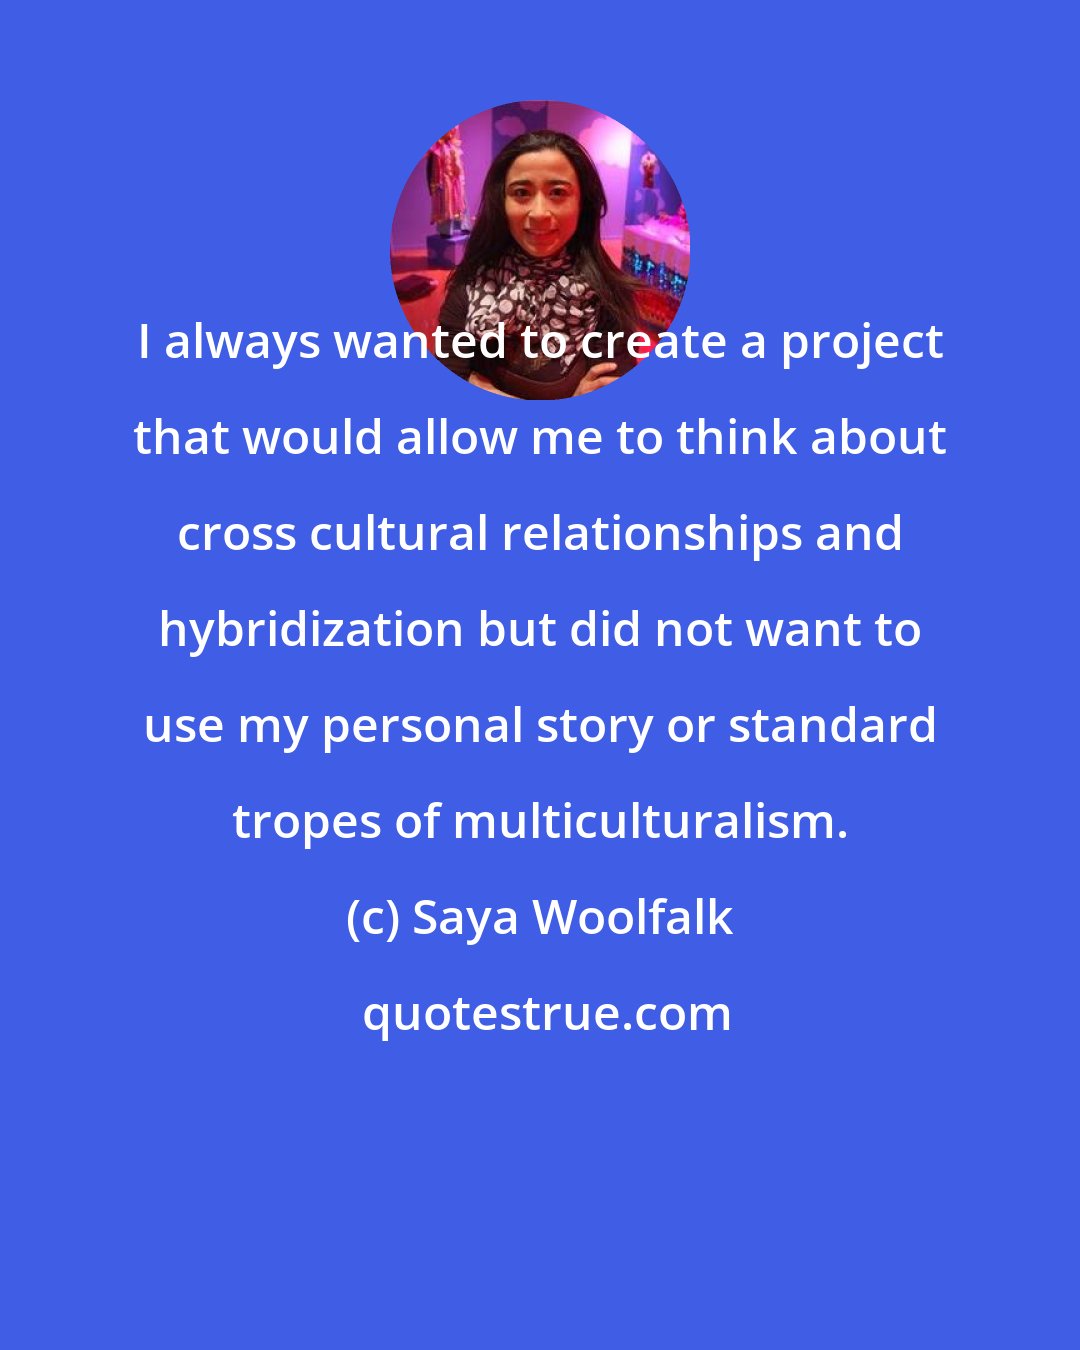 Saya Woolfalk: I always wanted to create a project that would allow me to think about cross cultural relationships and hybridization but did not want to use my personal story or standard tropes of multiculturalism.